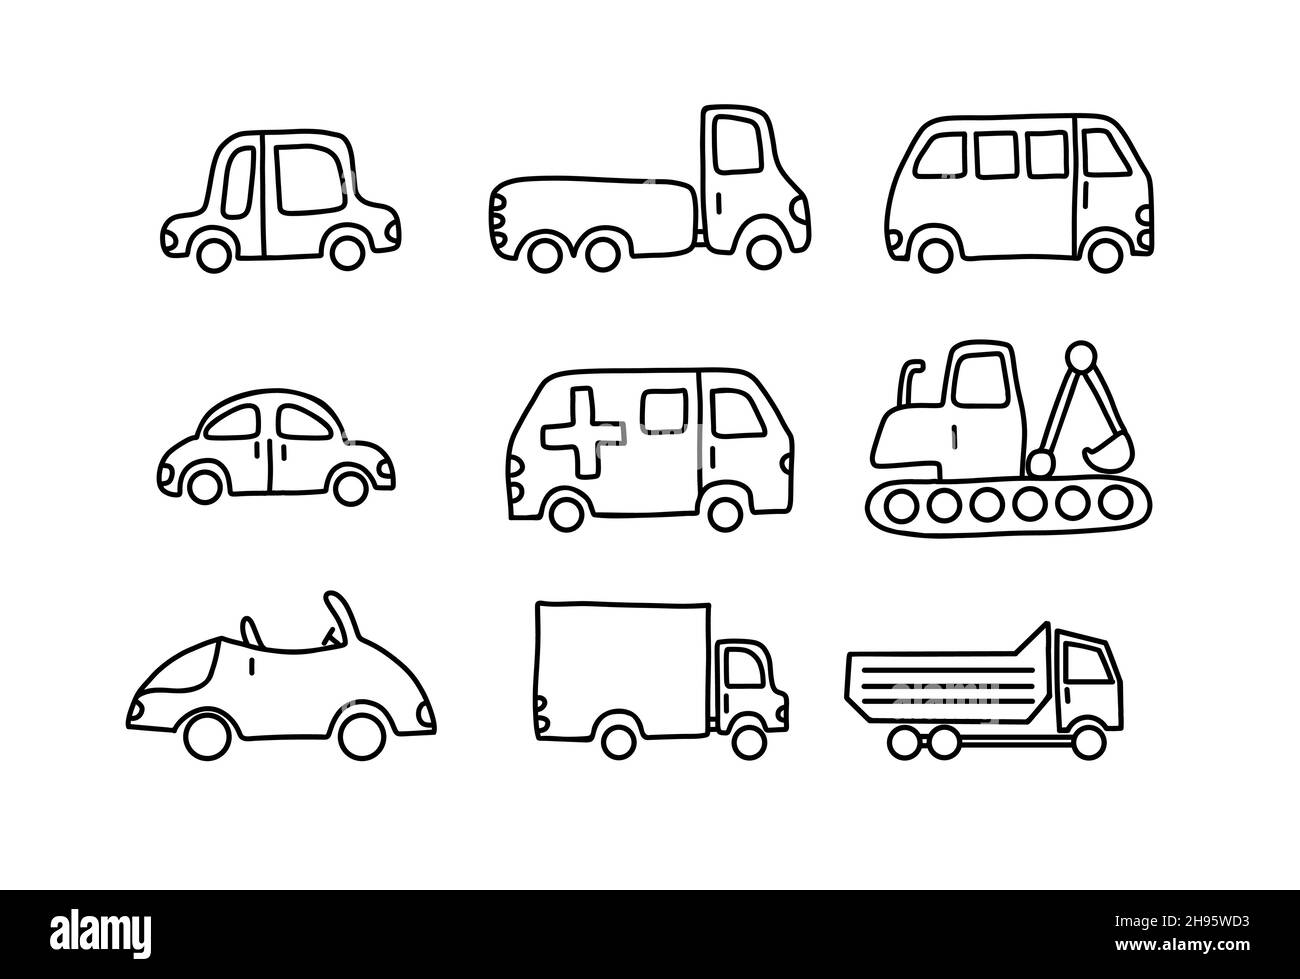 Cute collection cars isolated on a white background. Icons in doodle style for kids design. Isolated on white vector illustration Stock Vector